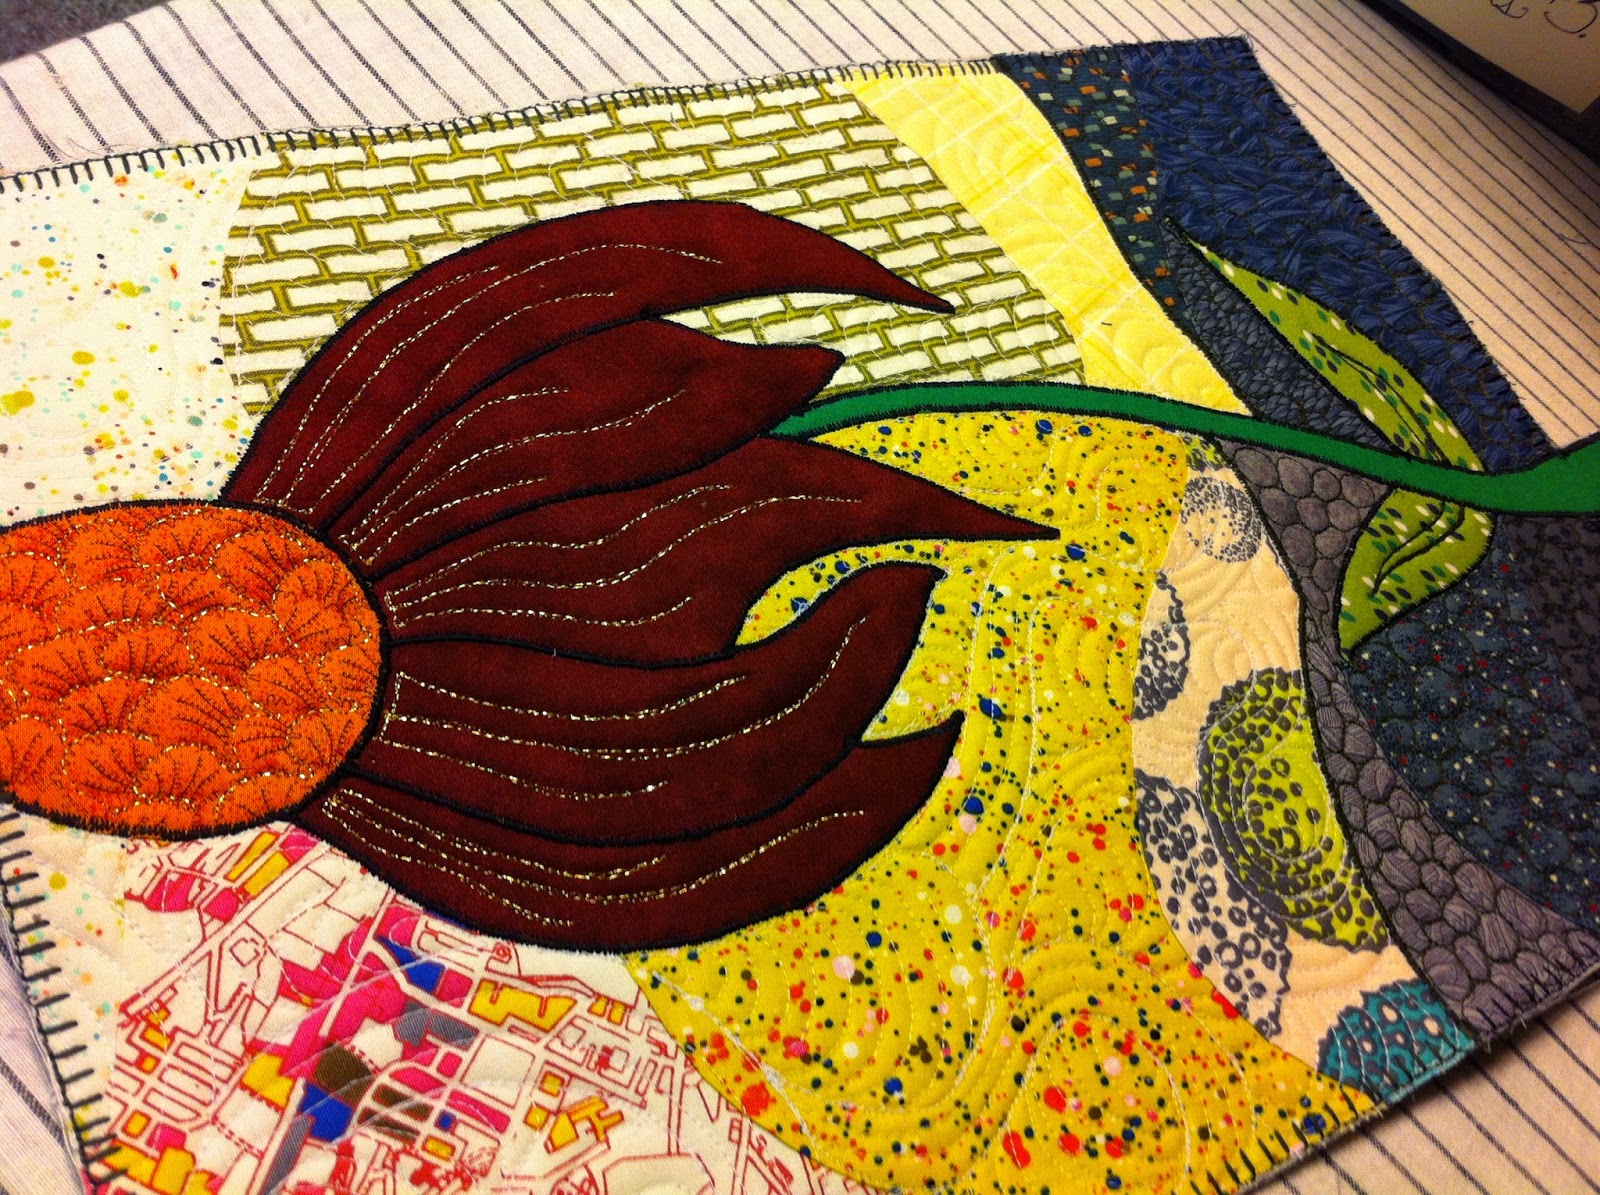 Sign up for a FUN new Quilting Class!